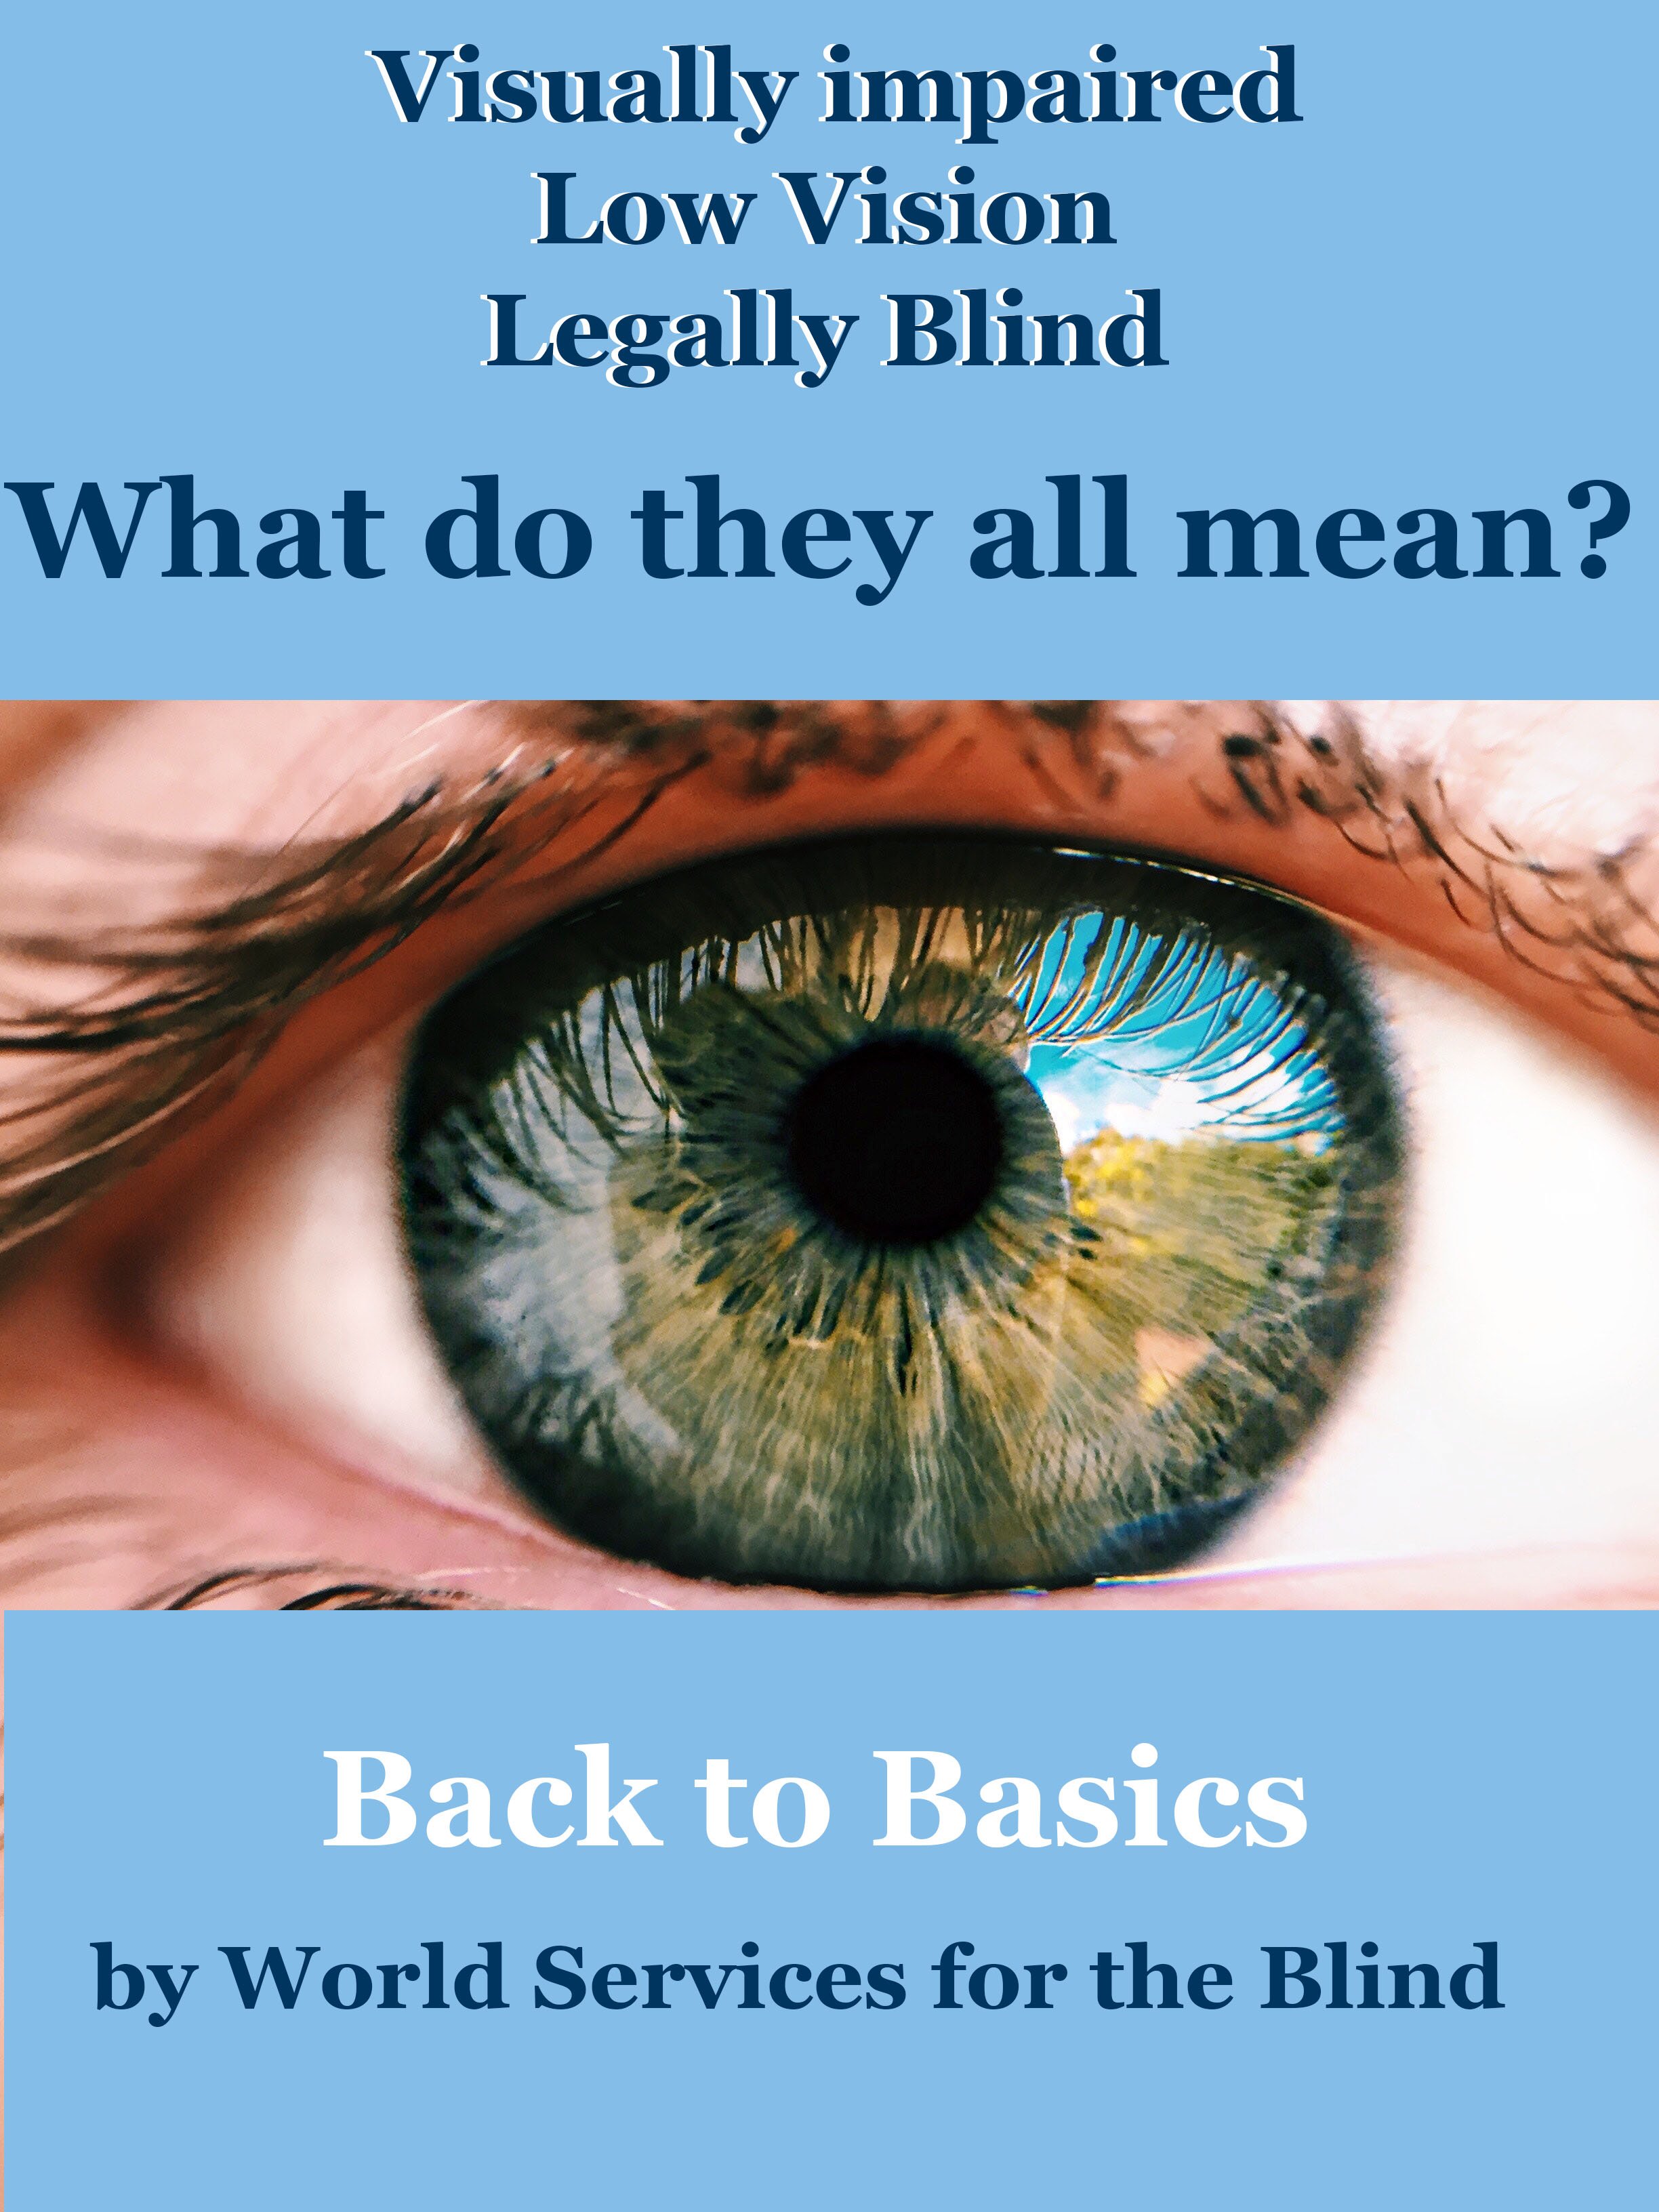 What's the Difference Between Low Vision and Blindness?